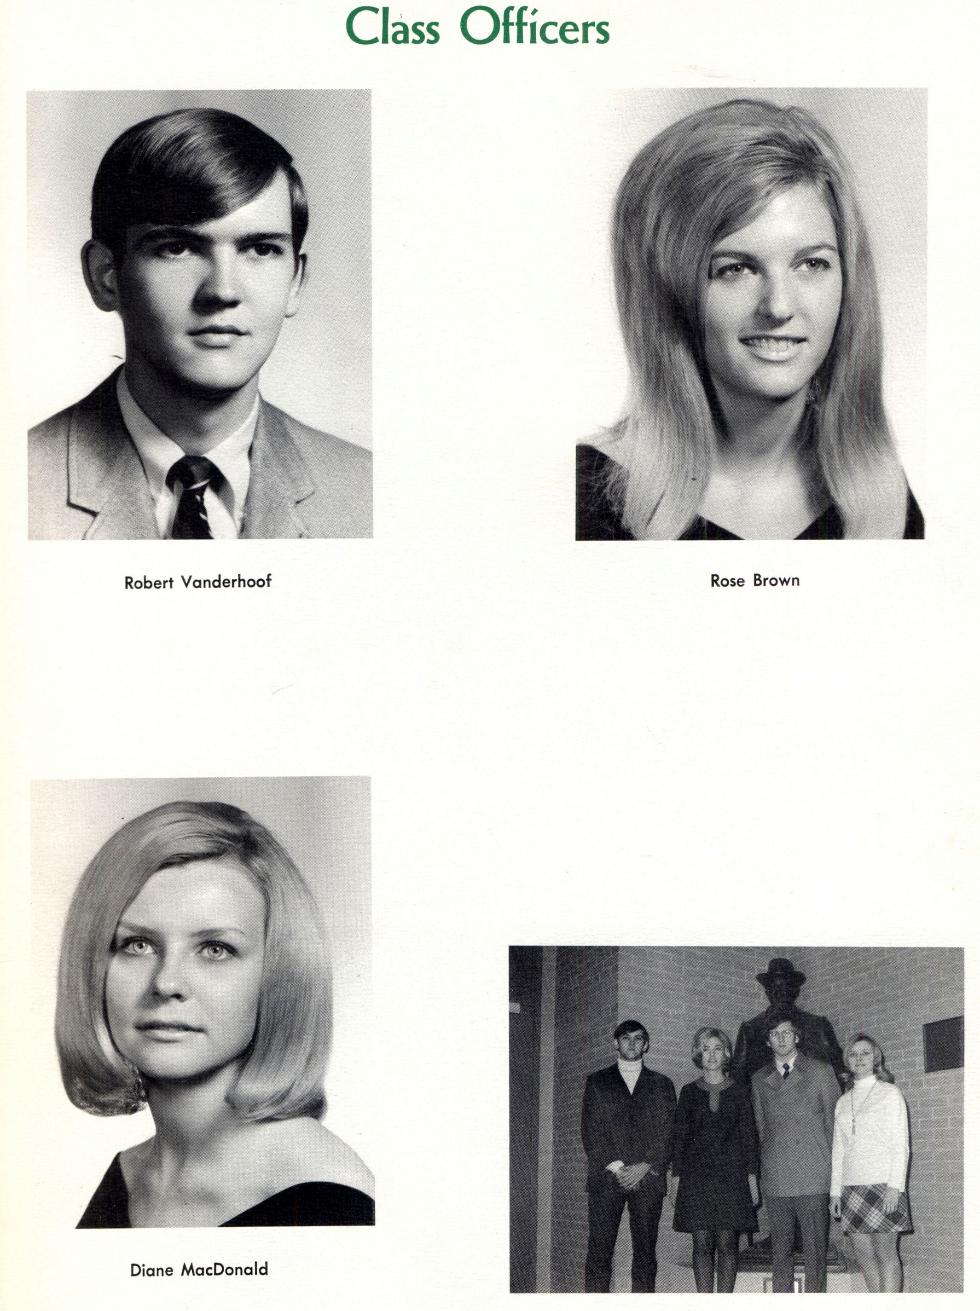 Worcester Industrial Technical Institute - Class of 1969 Yearbook Class Officers